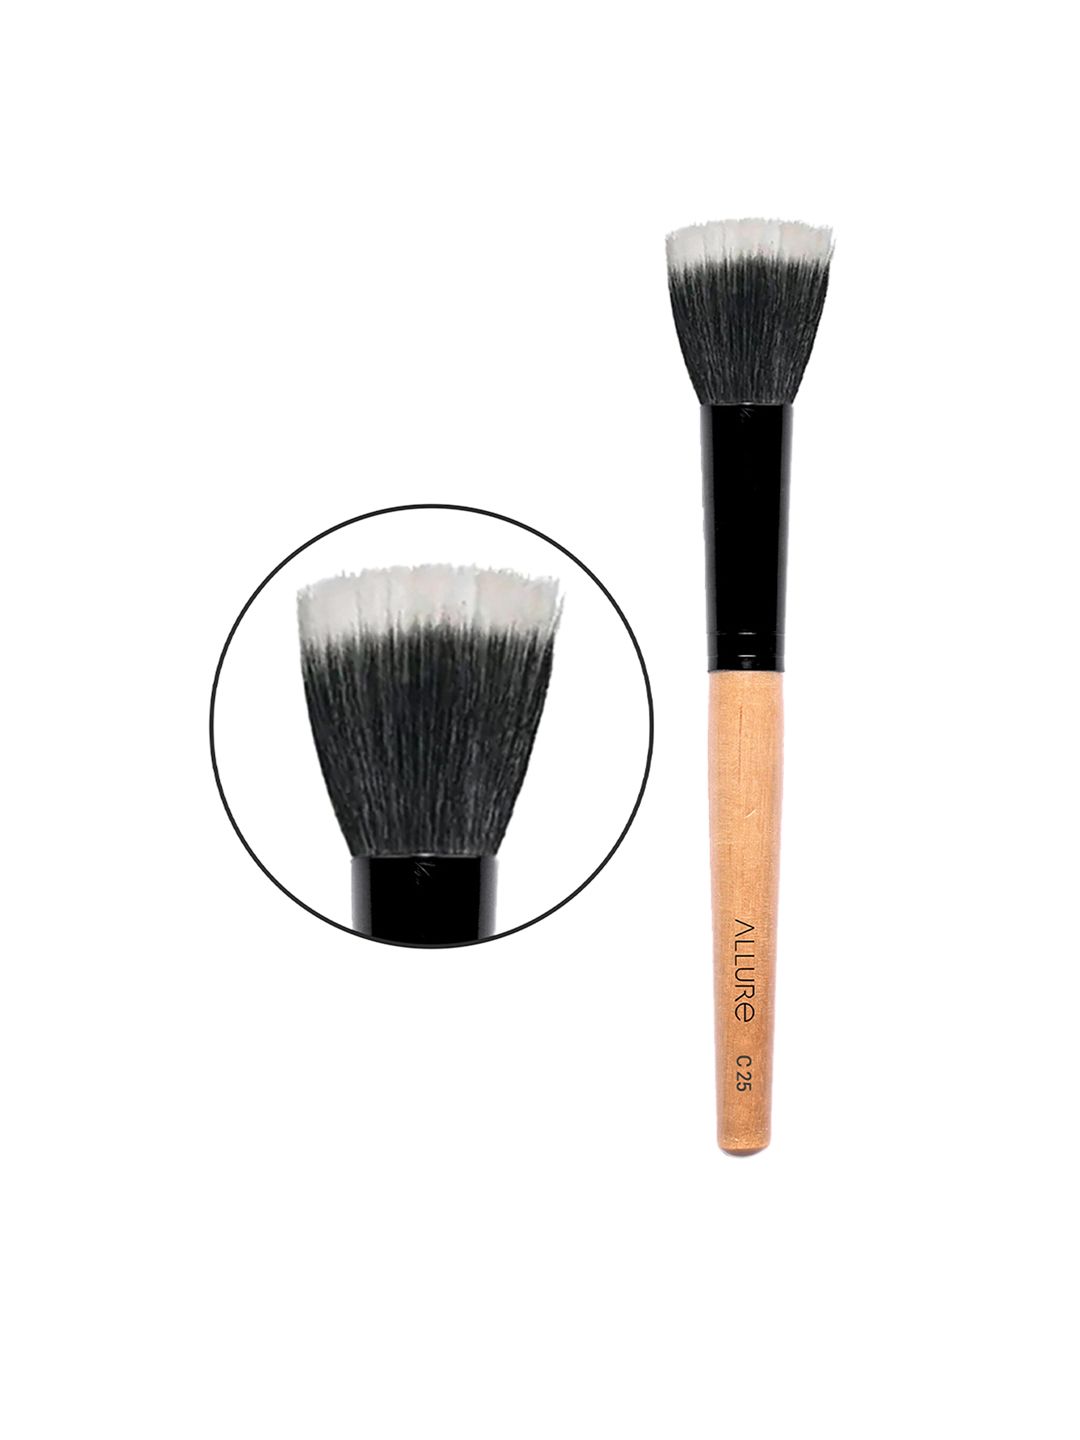 ALLURE Wooden Buffer Stippling Brush C-25 Price in India